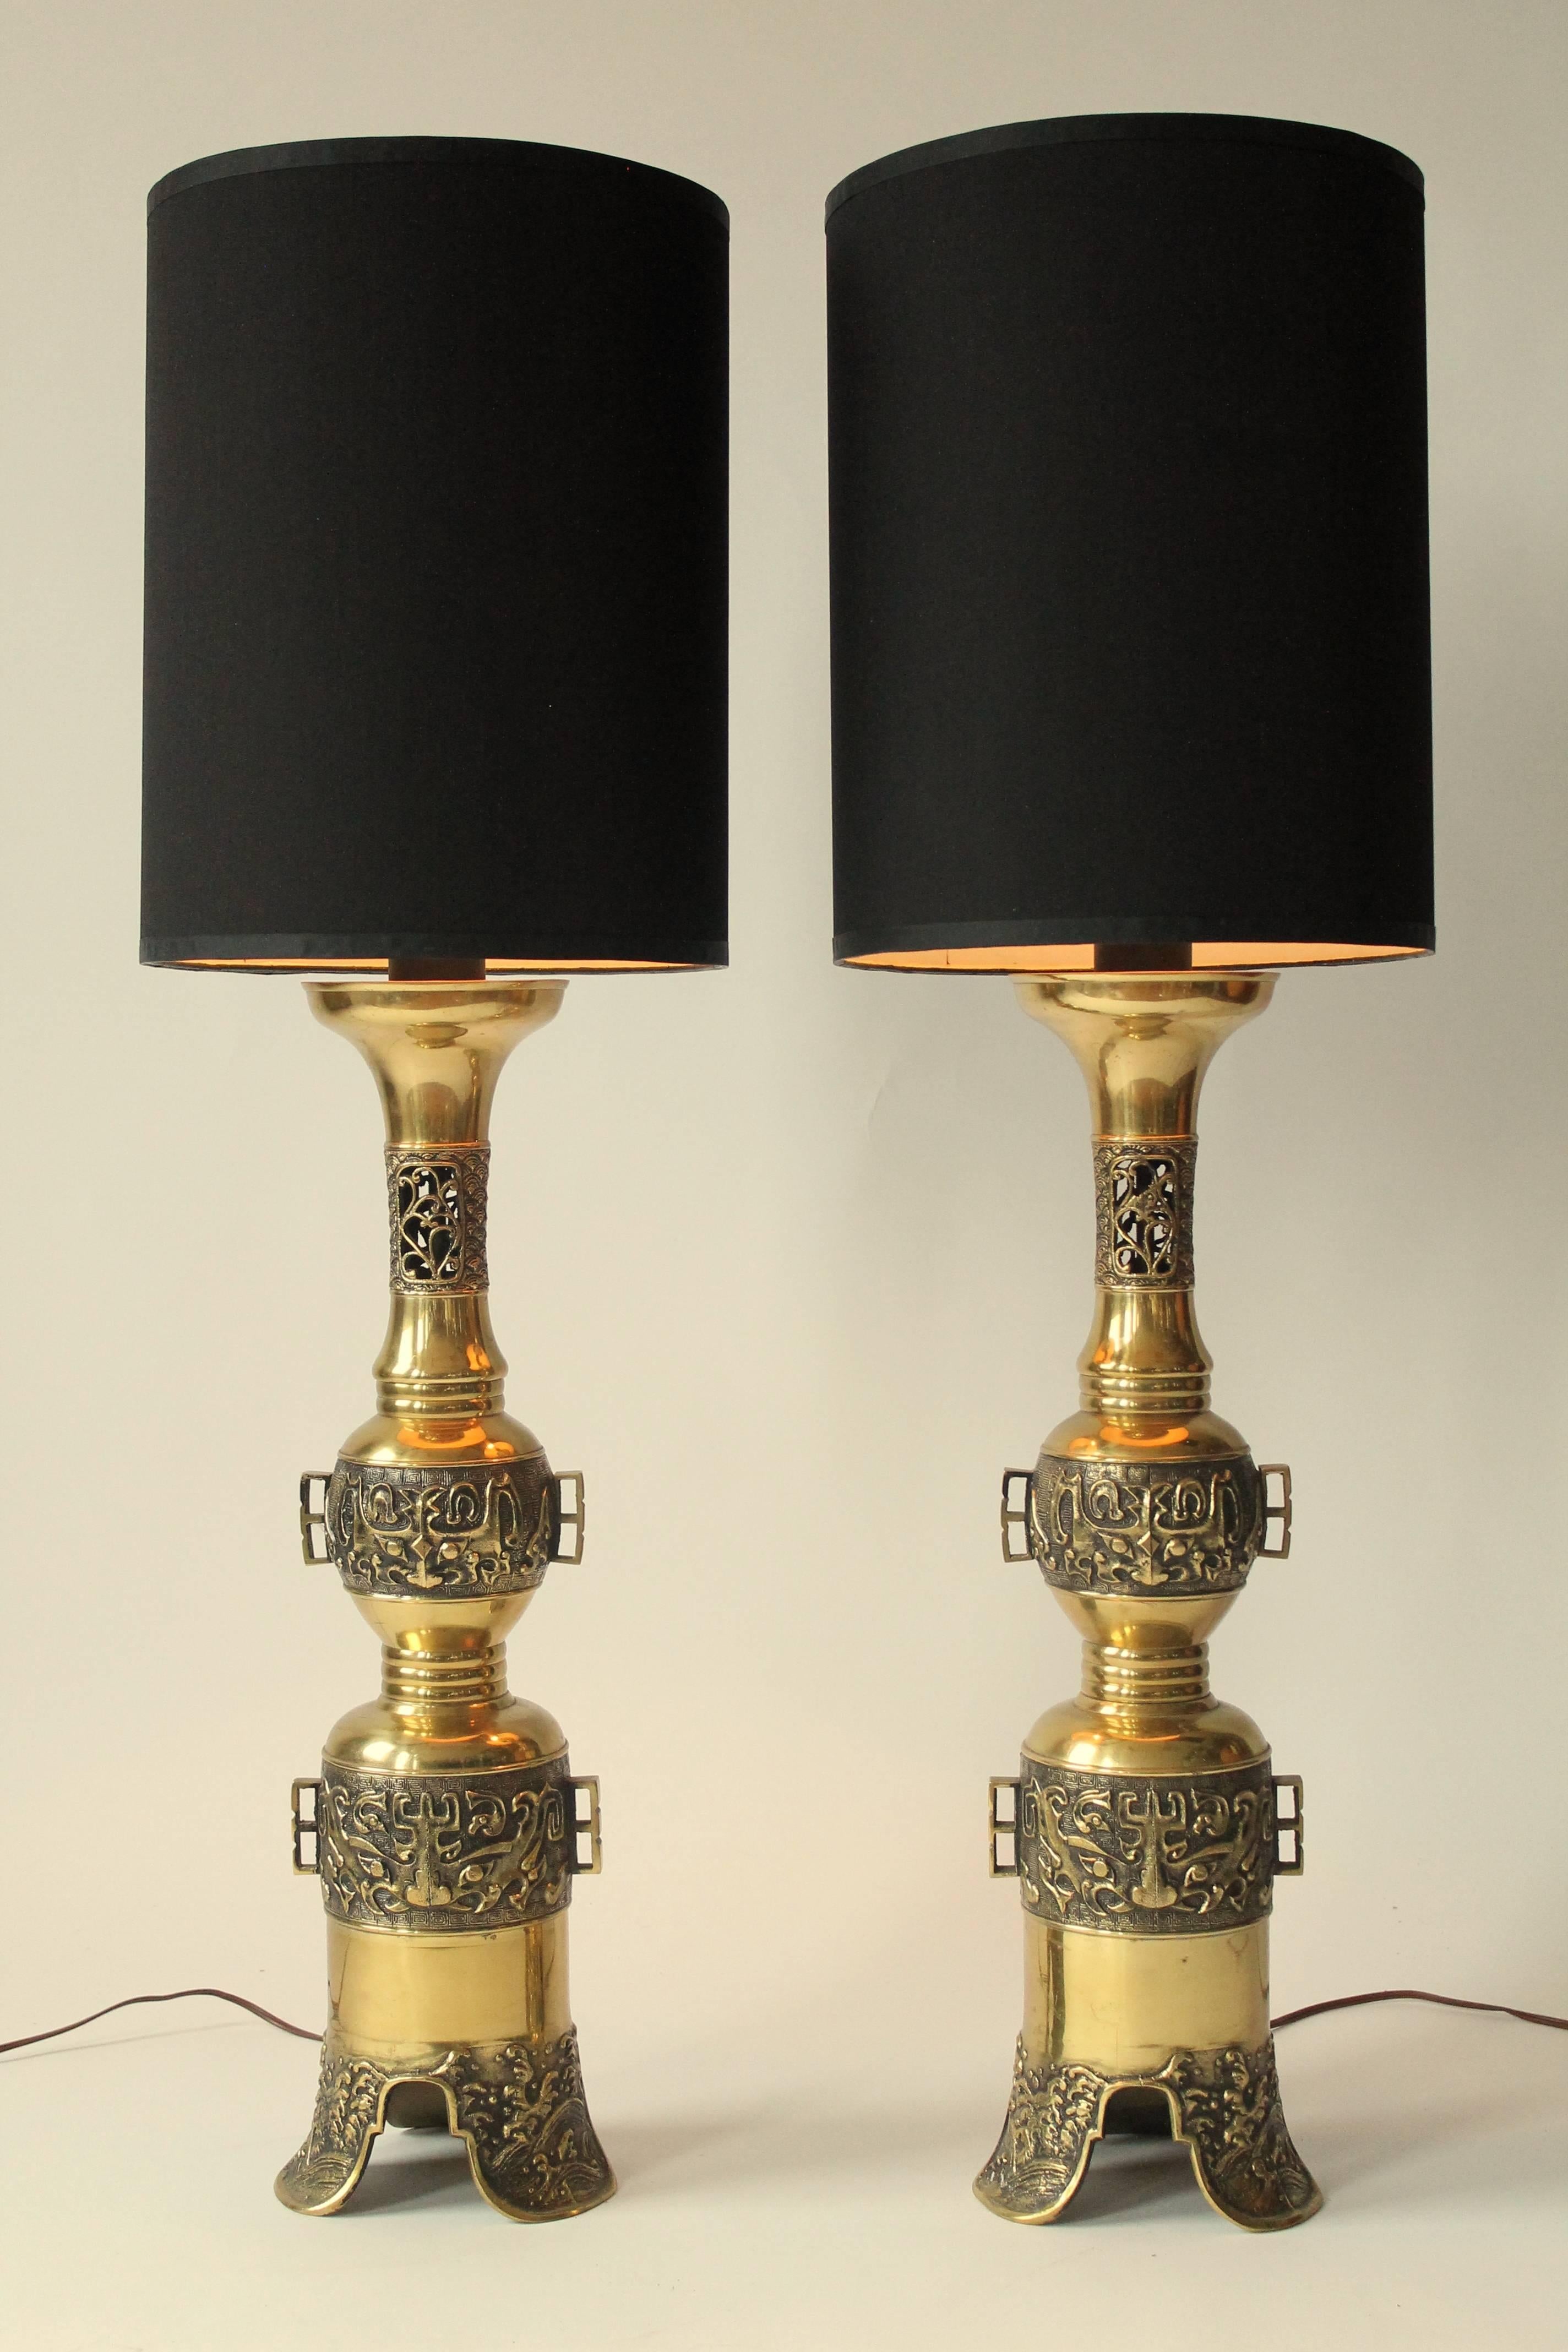 Prime quality Mid-Century  brass casted with a  near incised precision representing tribal motif with an Asian inspiration to it. 

The remaining of the lamp have been milled and polished. 

Each lamp weight 10 pounds. 

Measures: 38 to 42 inches in